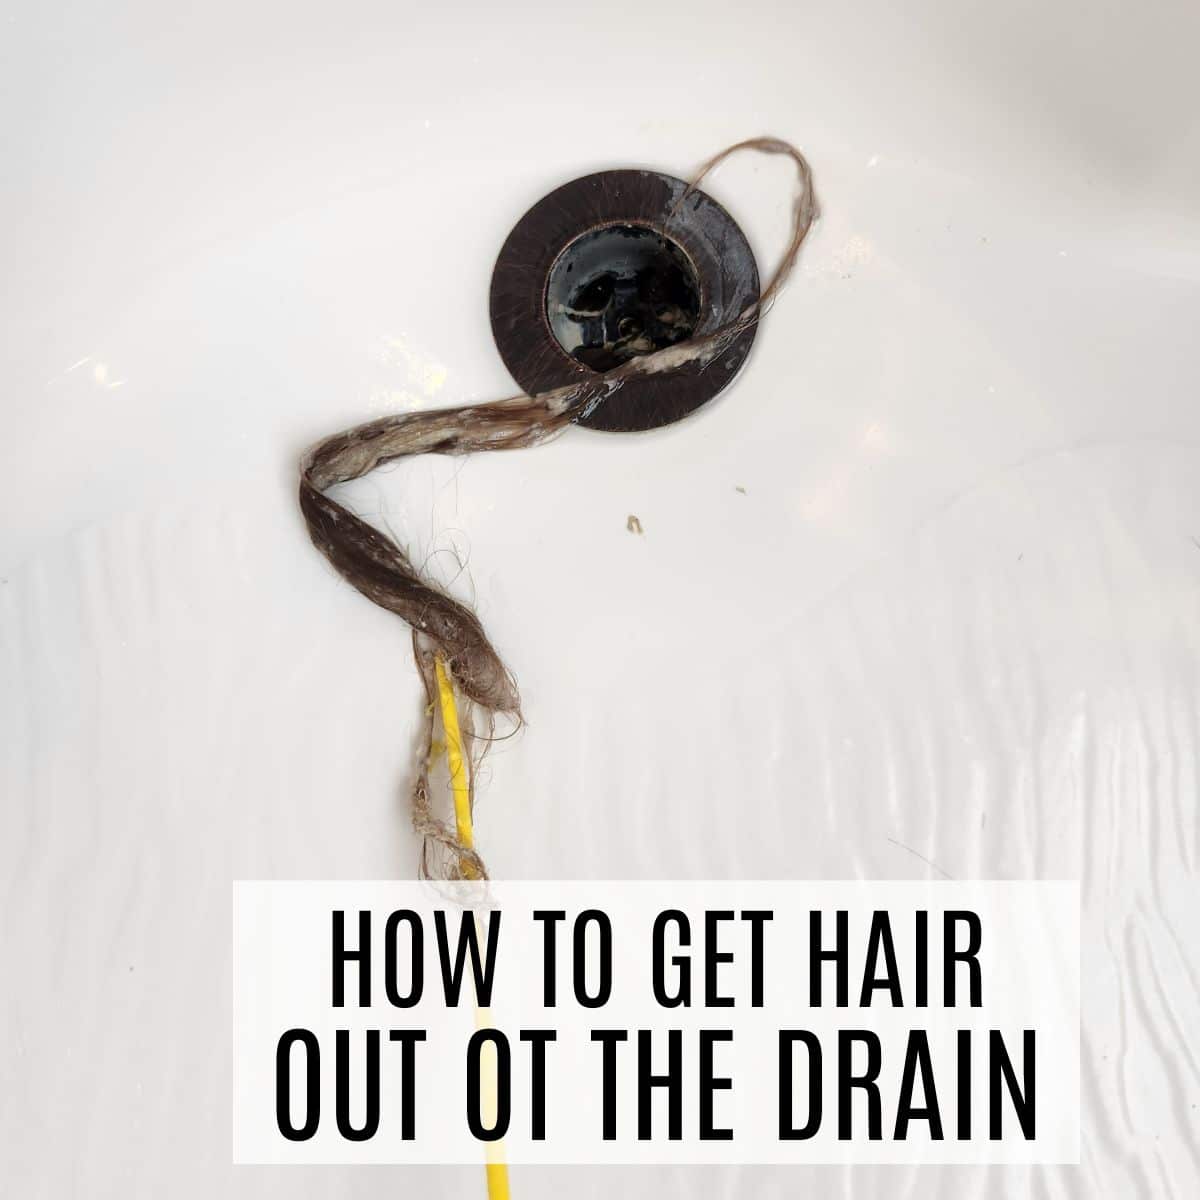 How To Get Hair Out Of Drain Like A Pro - Frugally Blonde